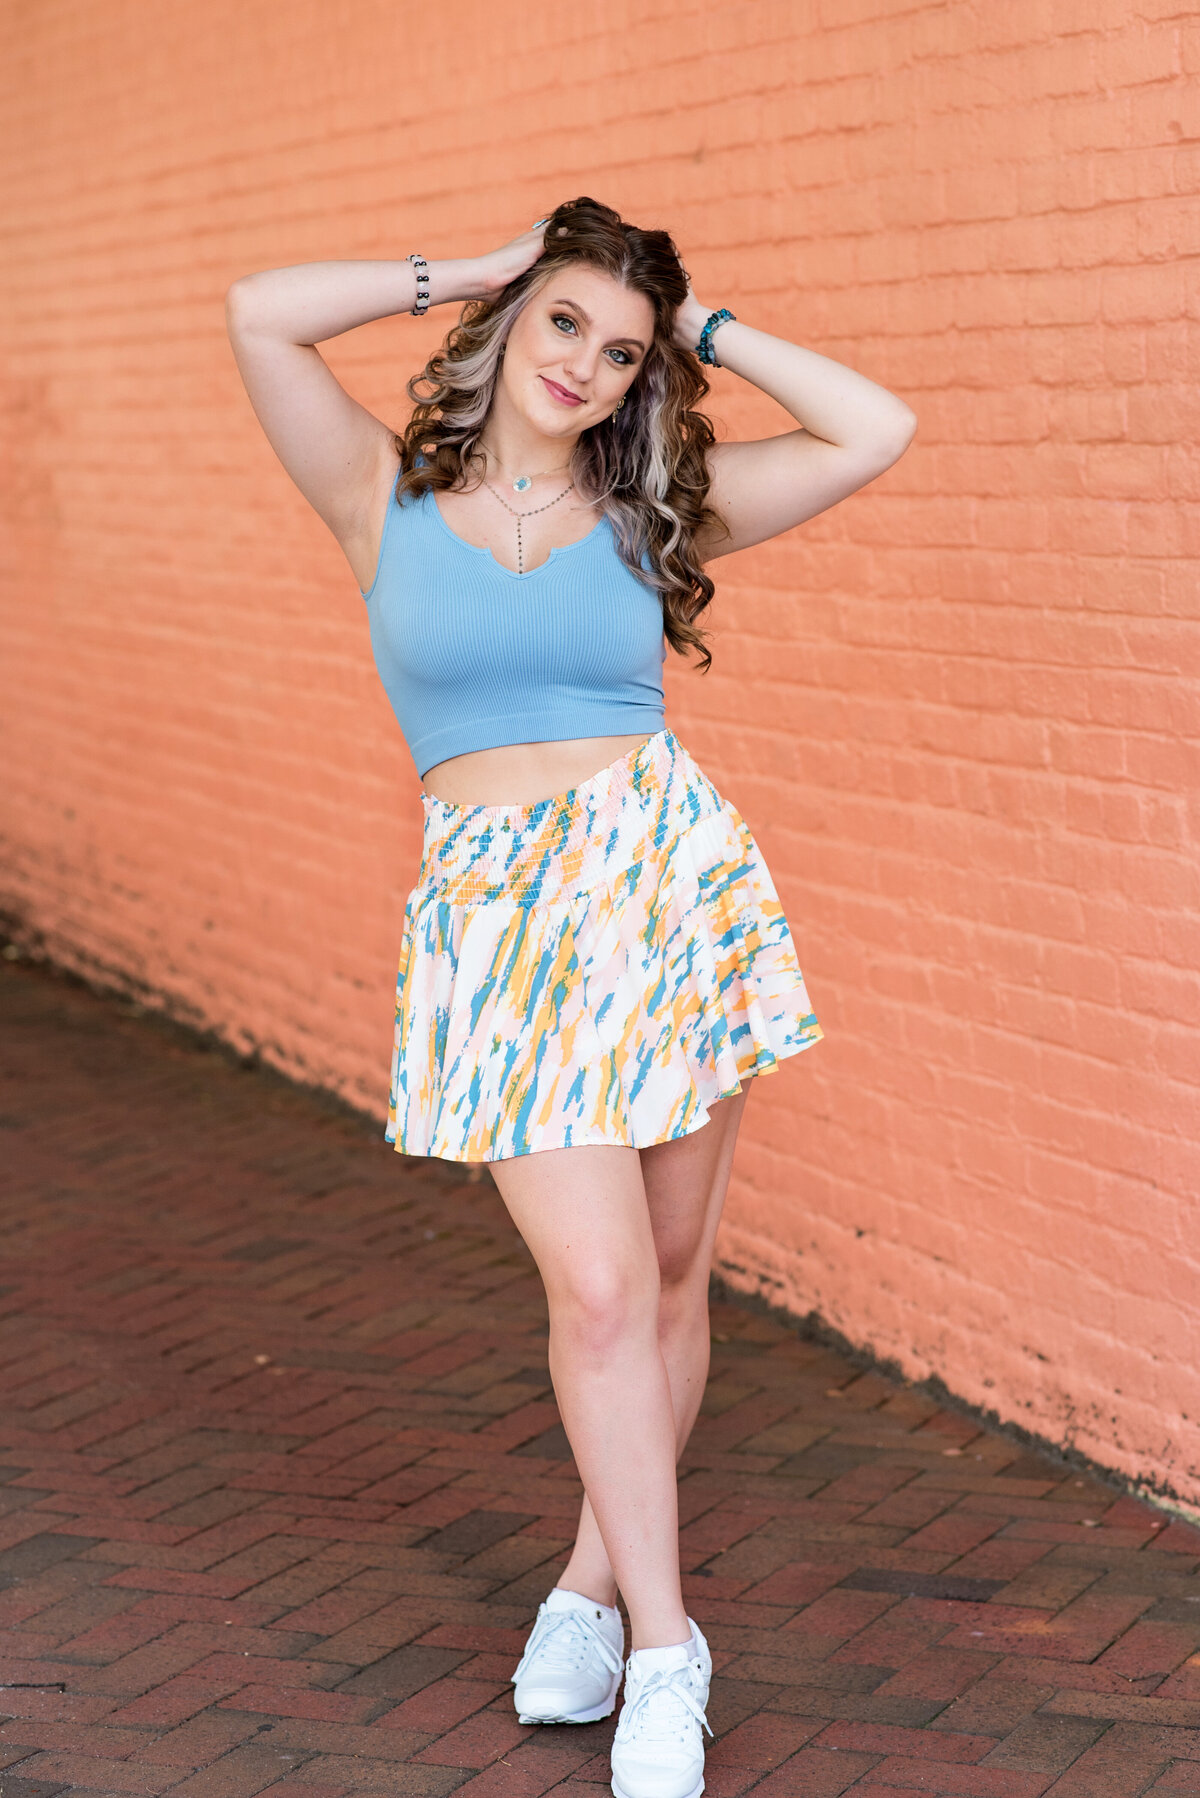 St. Catherines senior girl wearing tennis skirt and blue tank top poses with hands on head in front of coral brick wall downtown Richmond, VA.